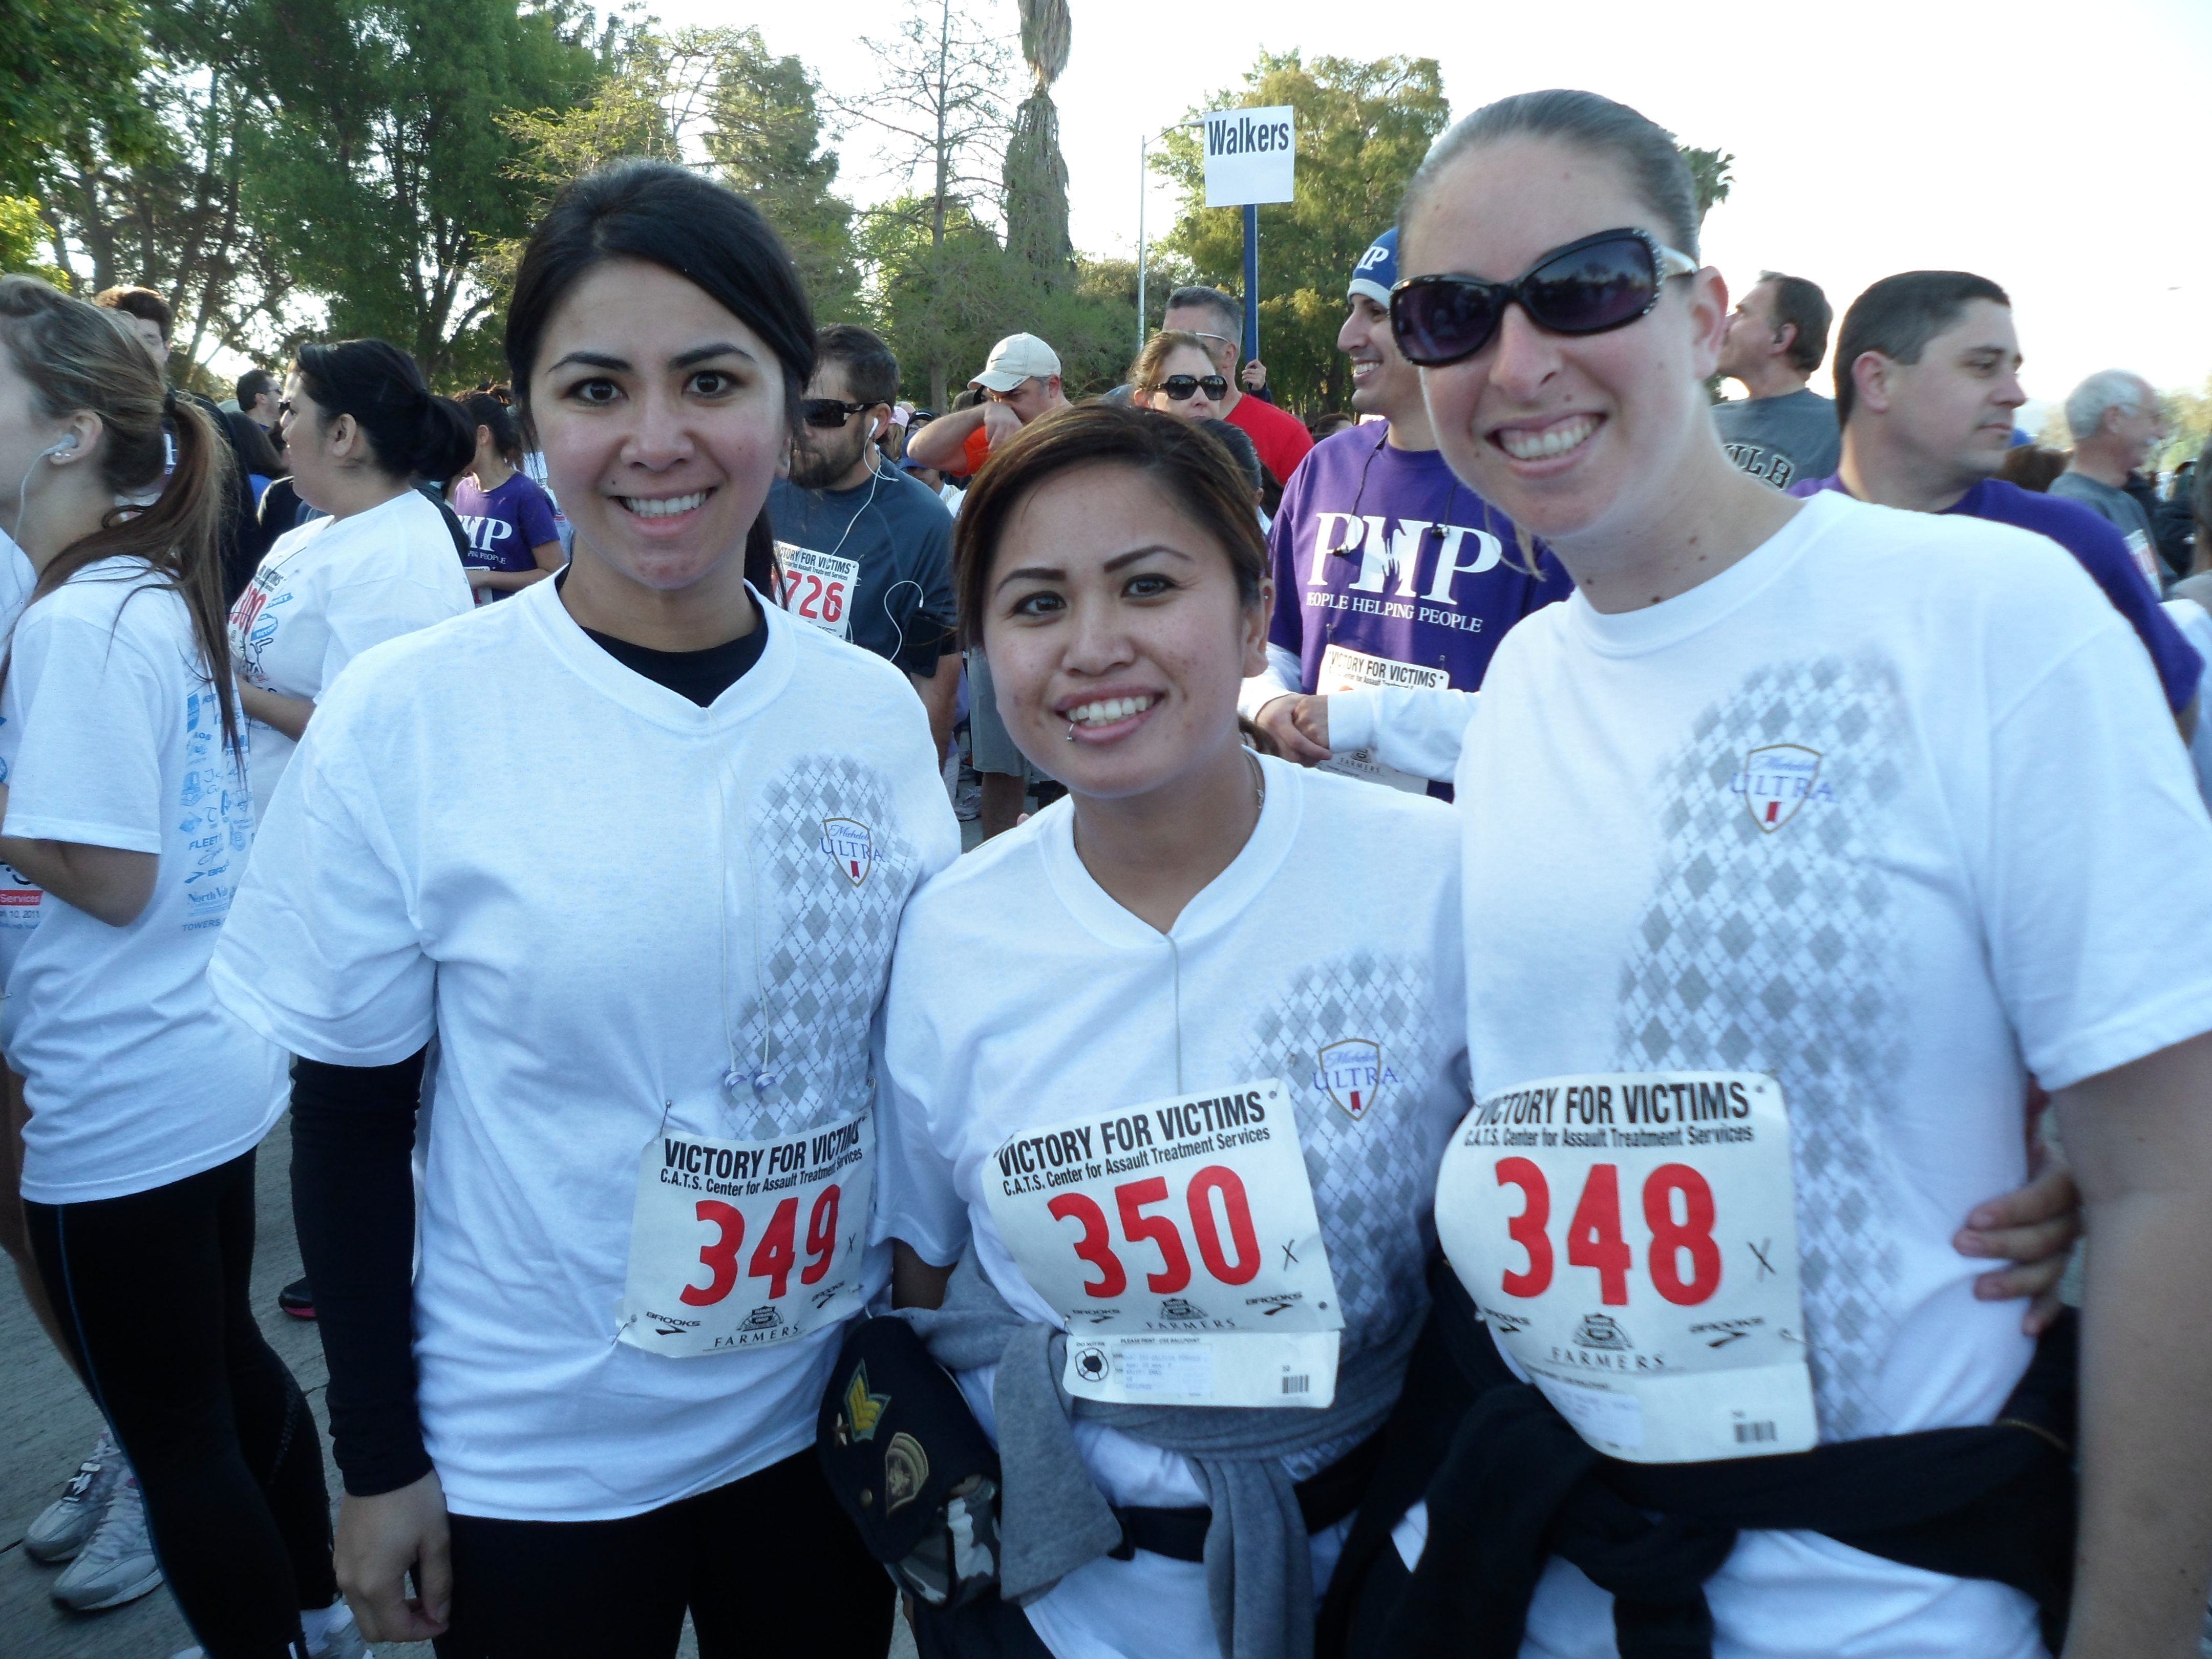 Aimee with Angela Friedlander and Tomica Baquet, running for the Victory for Victims 5k Run/Walk in Balboa Park.